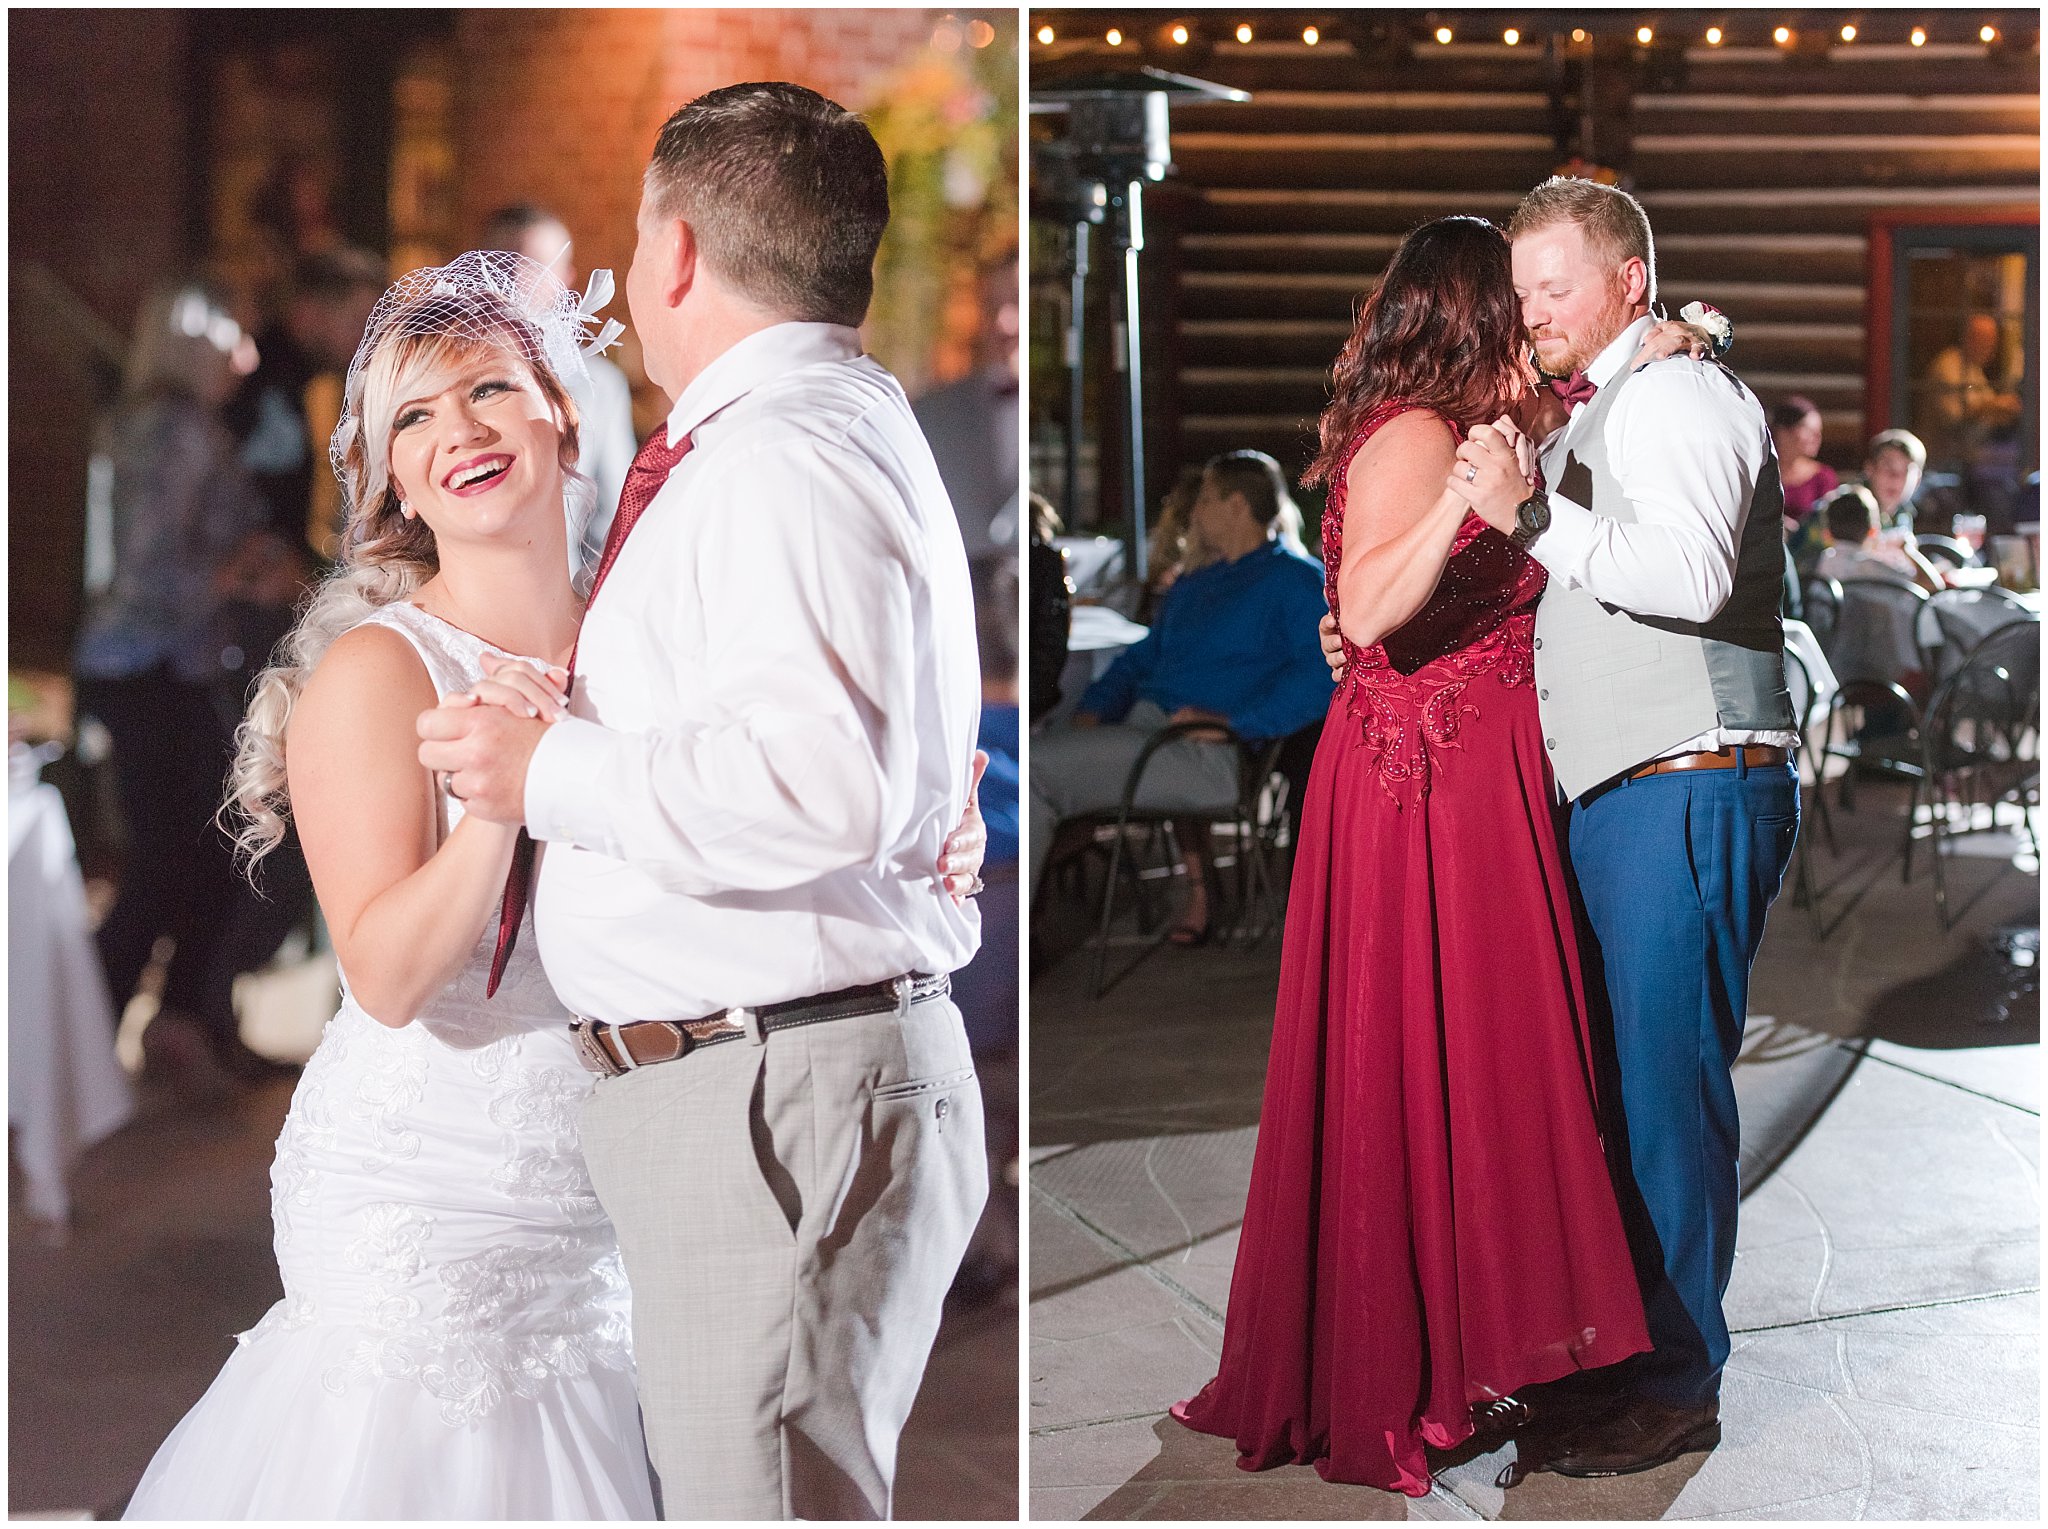 Daddy Daughter dance and mother son dance during wedding reception | Log Haven Summer Mountain Wedding | Jessie and Dallin Photography